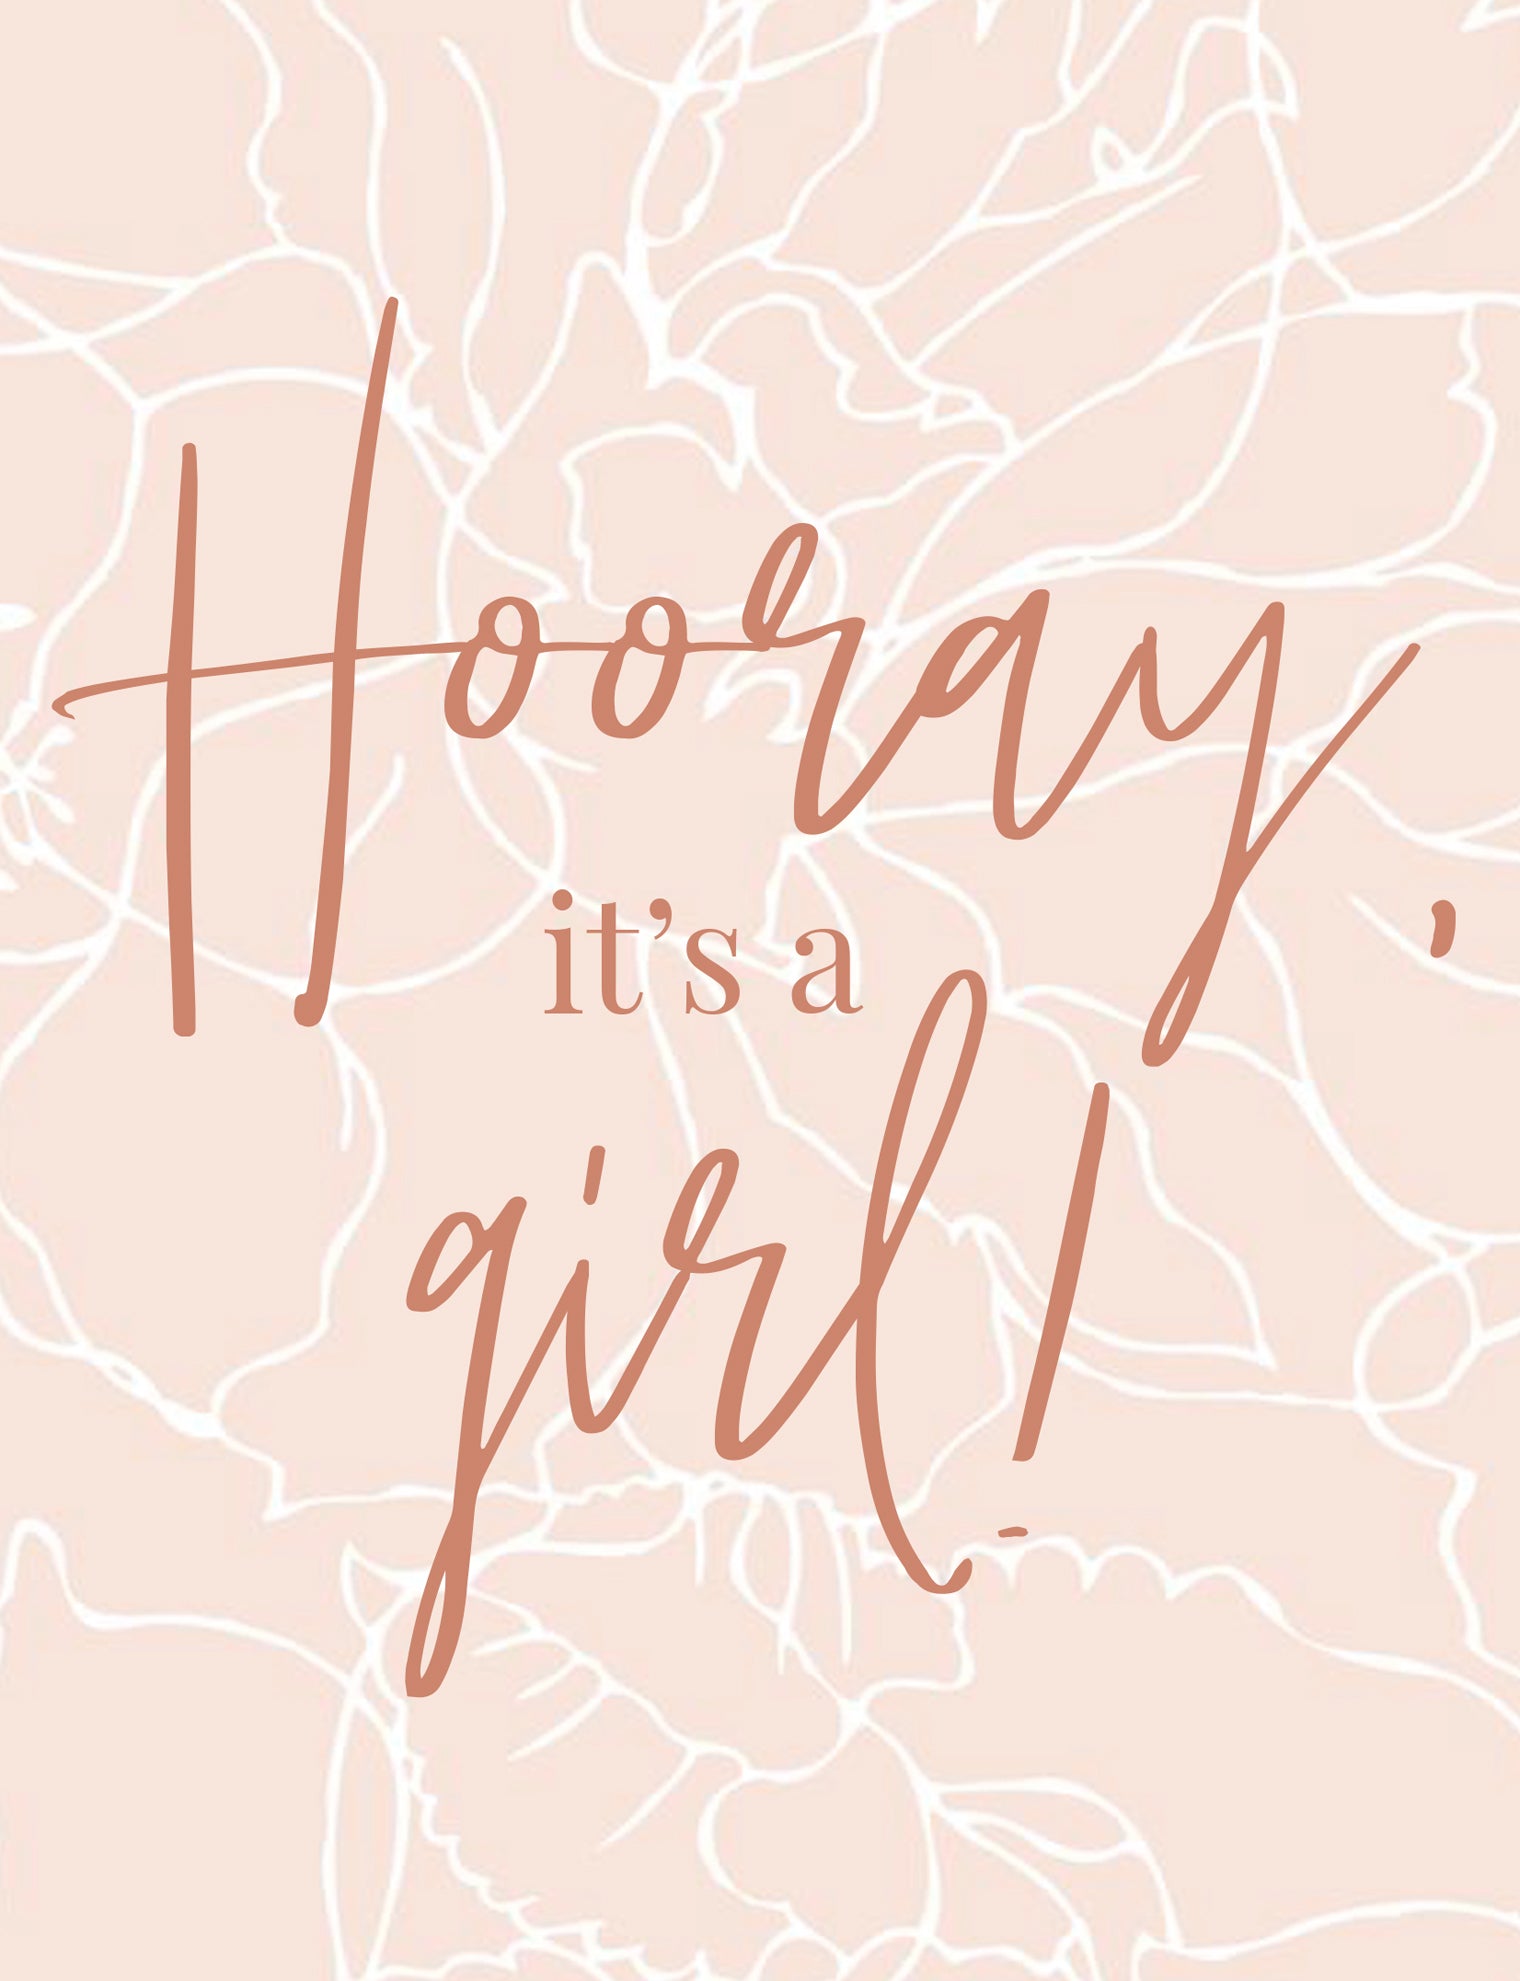 Horray! It's a Girl Greeting Card